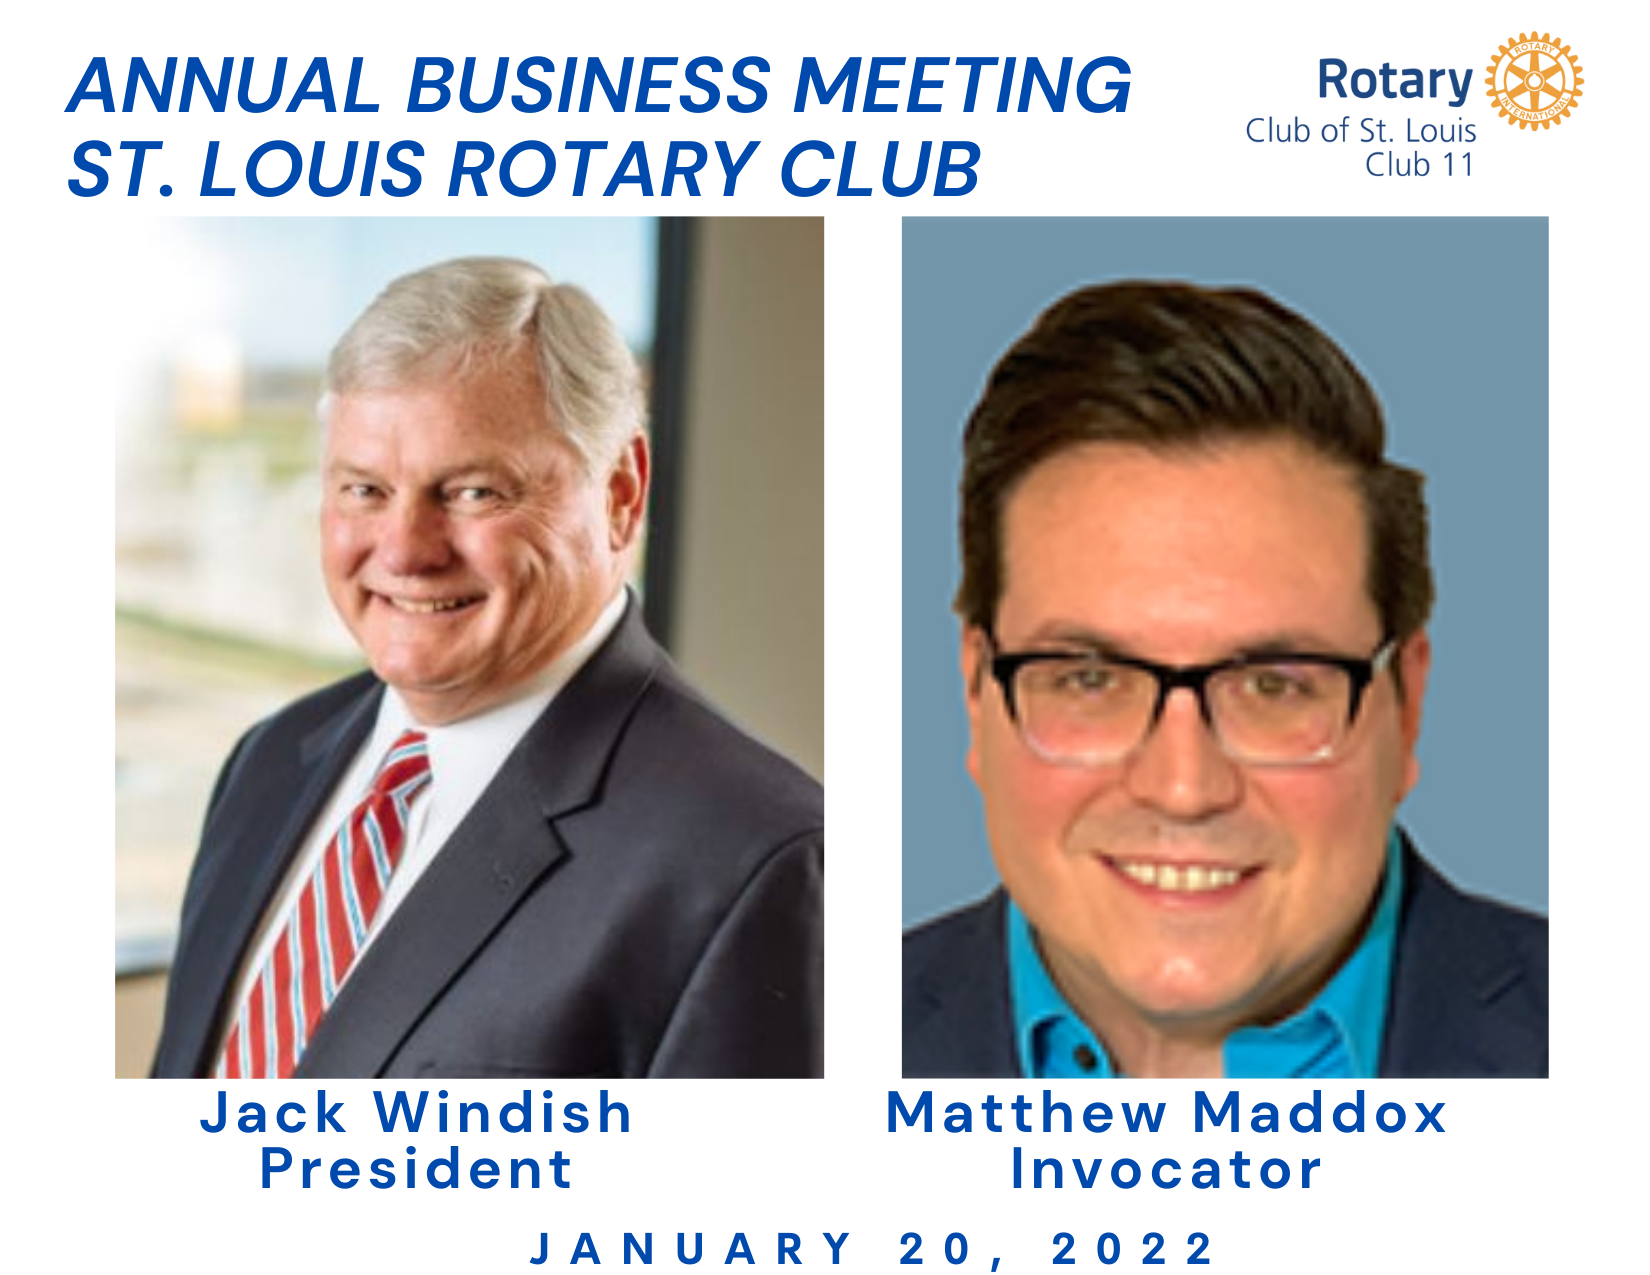 St. Louis Rotary Annual Business Meeting 1-2022; President Jack Windish and Invocator: Matthew Maddox